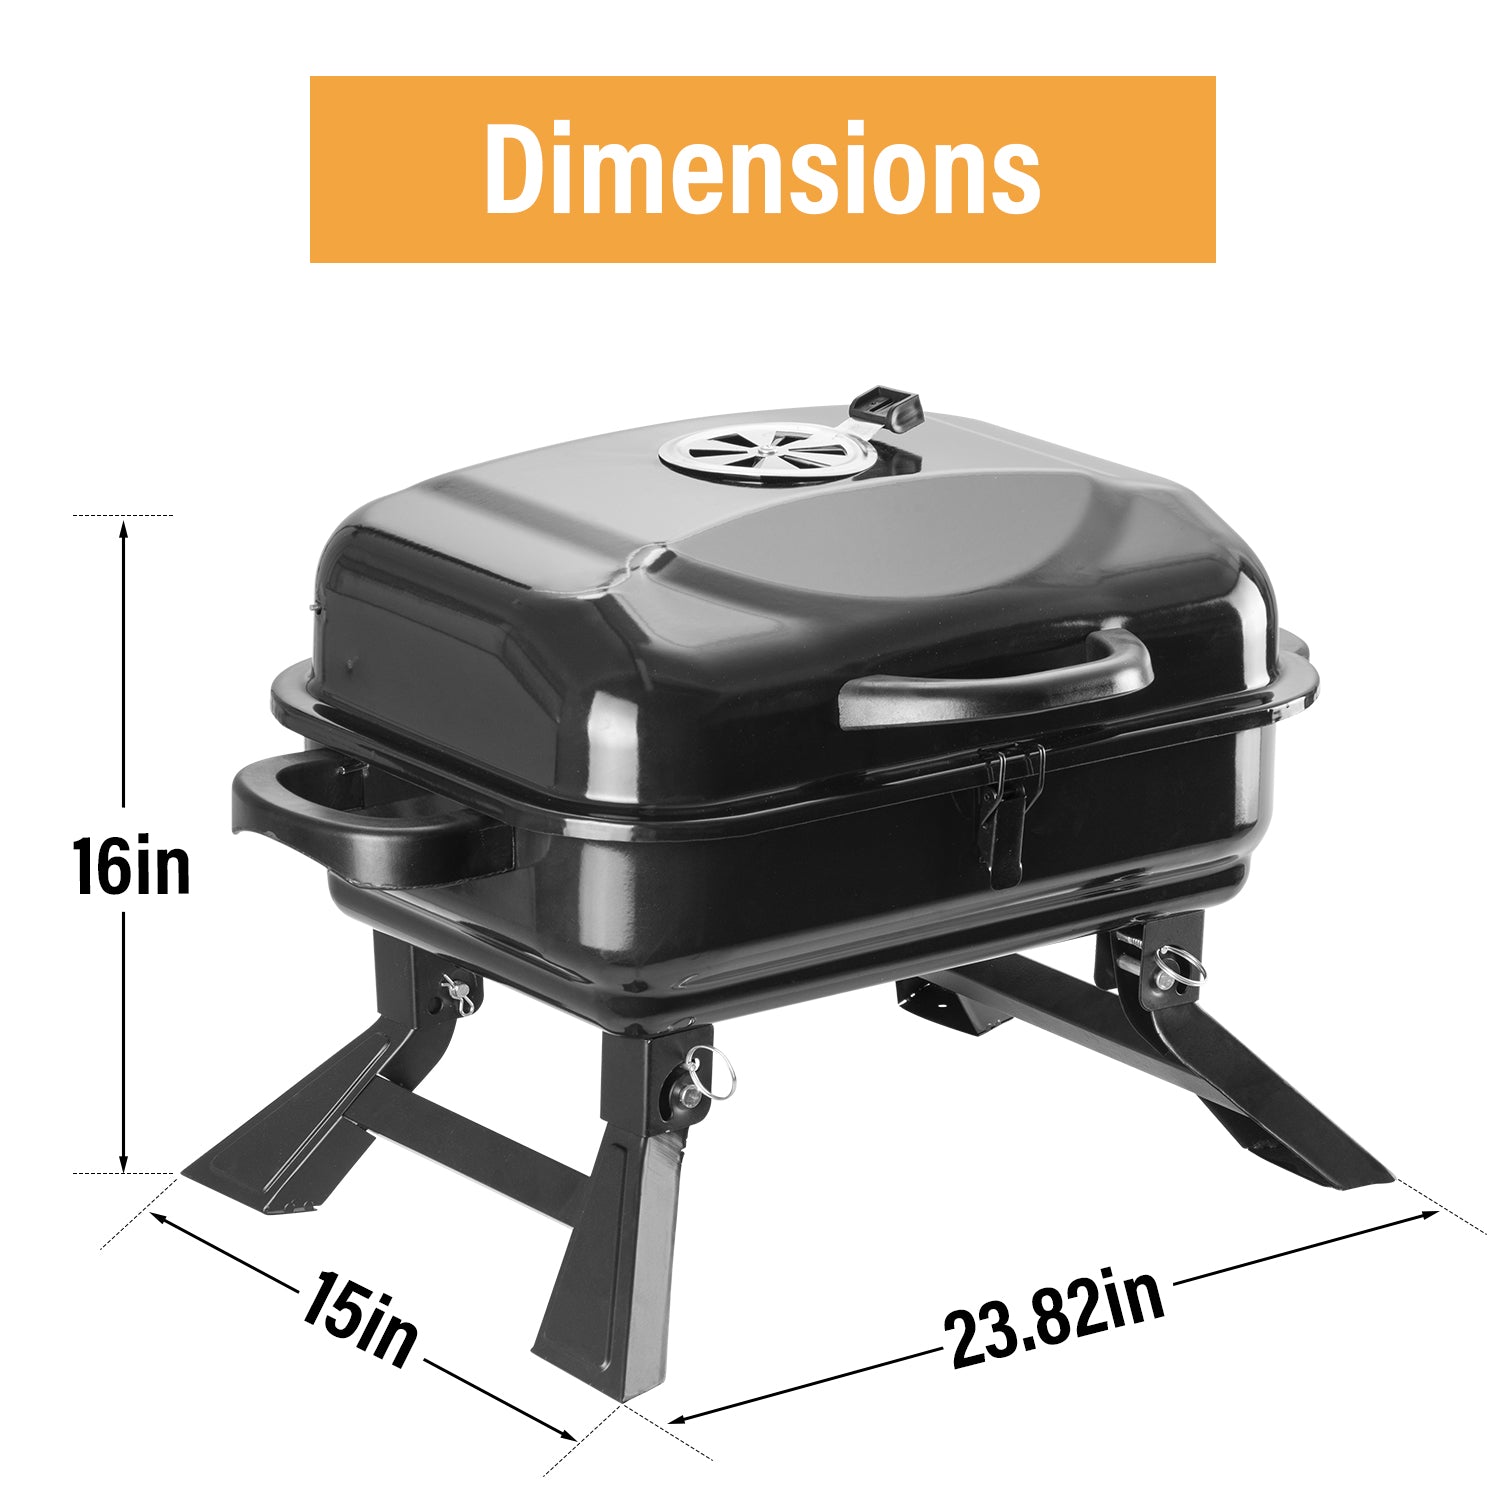 Ainfox 17.52" x 12.6" Portable Charcoal Grill $30 + Free Shipping